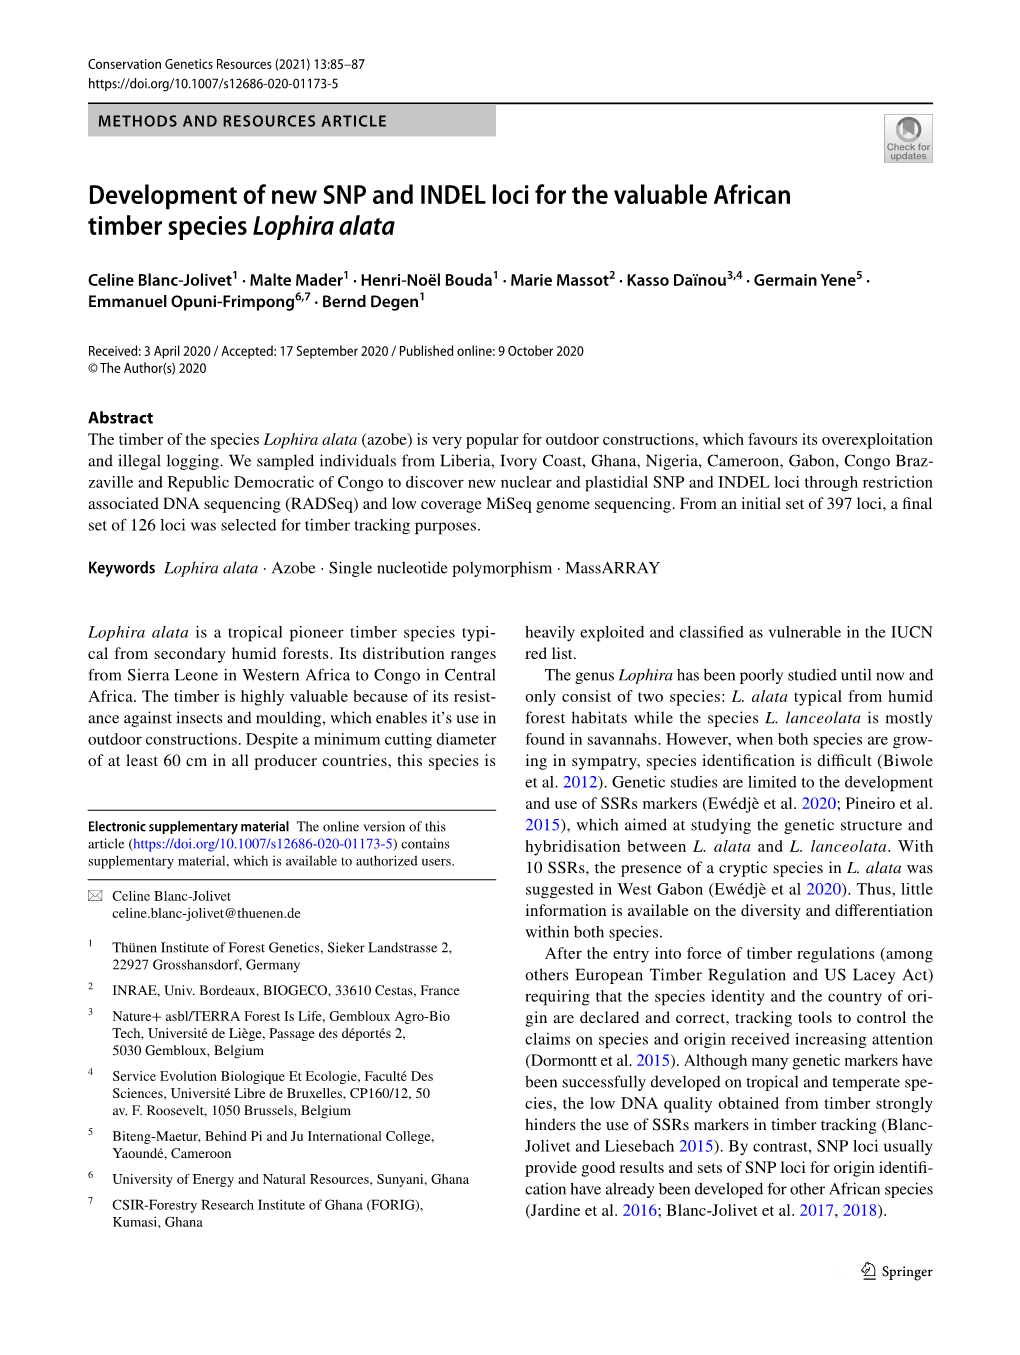 Development of New SNP and INDEL Loci for the Valuable African Timber Species Lophira Alata